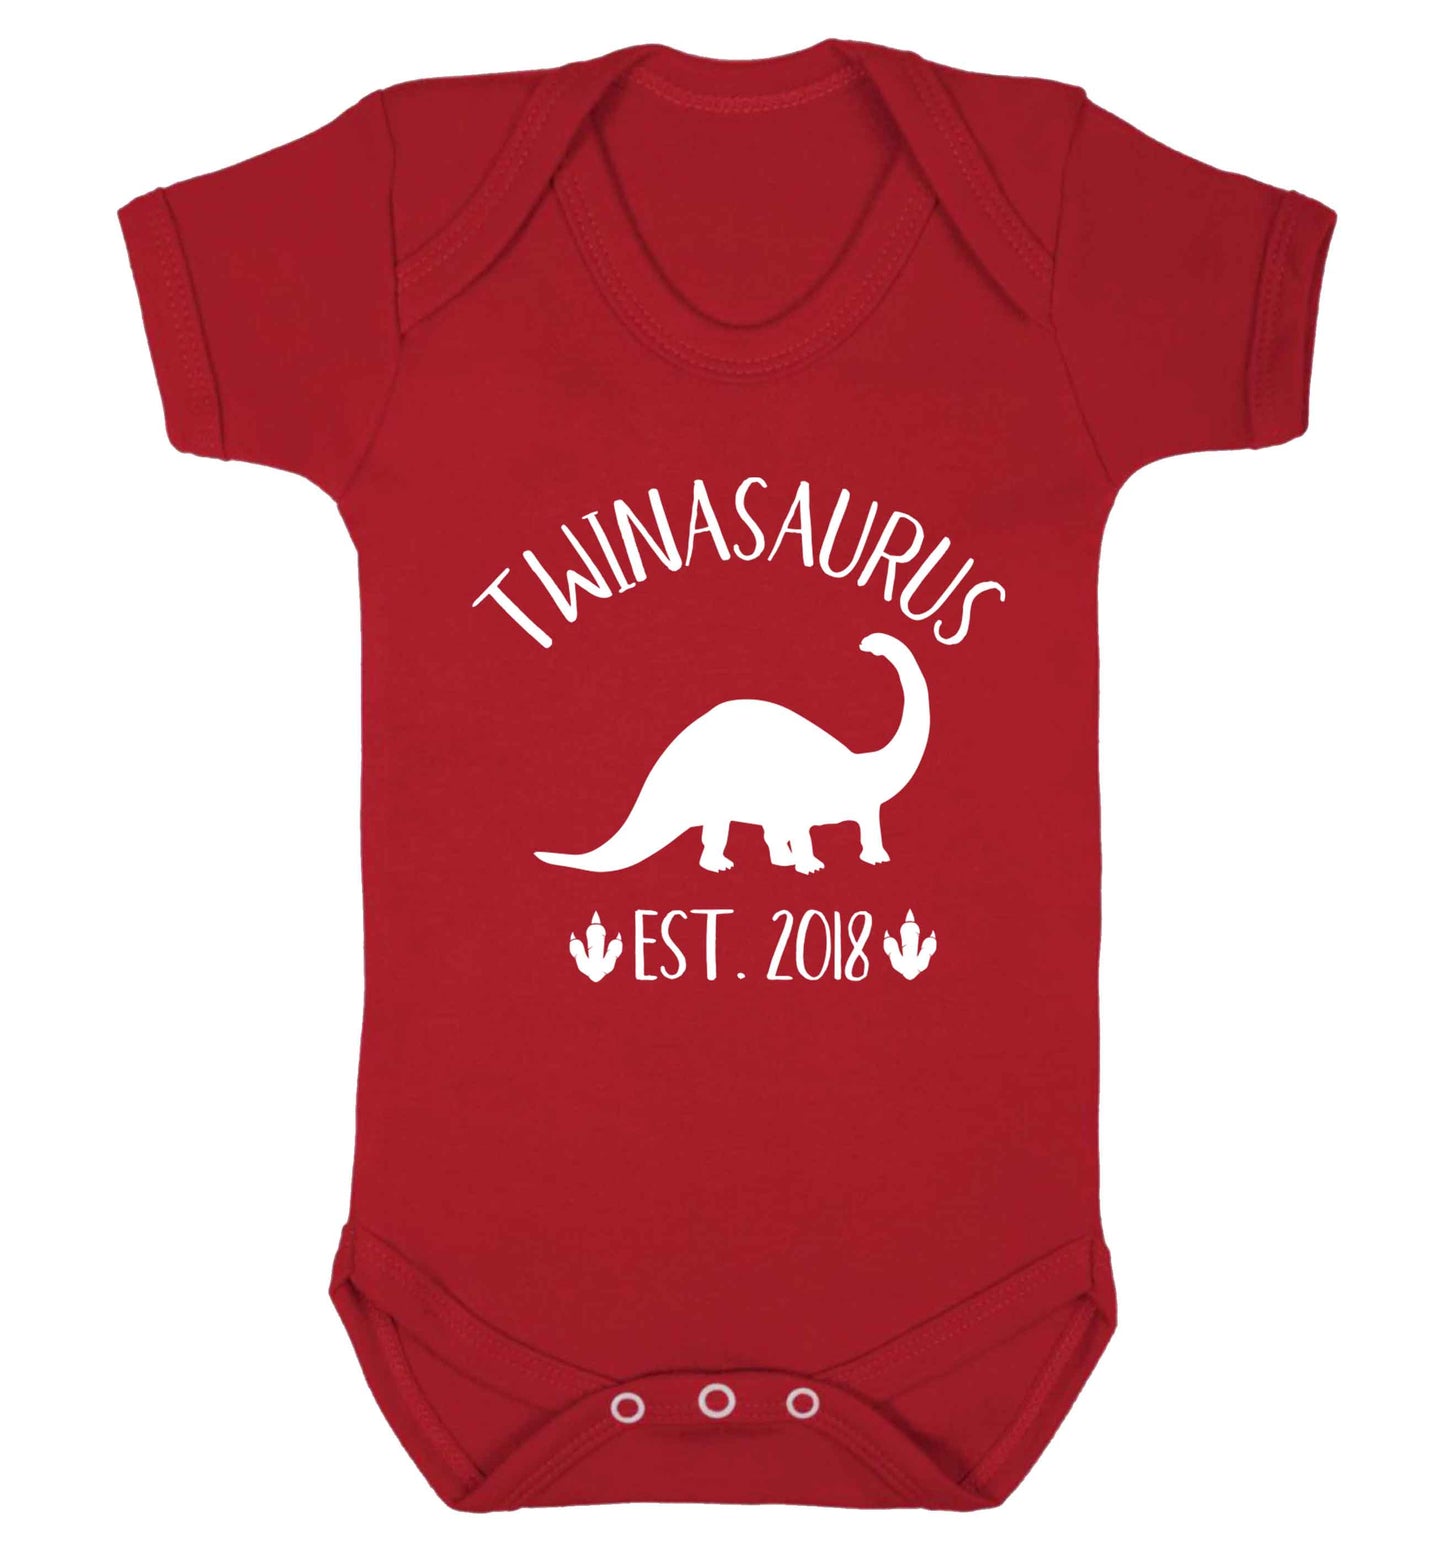 Personalised twinasaurus since (custom date) Baby Vest red 18-24 months